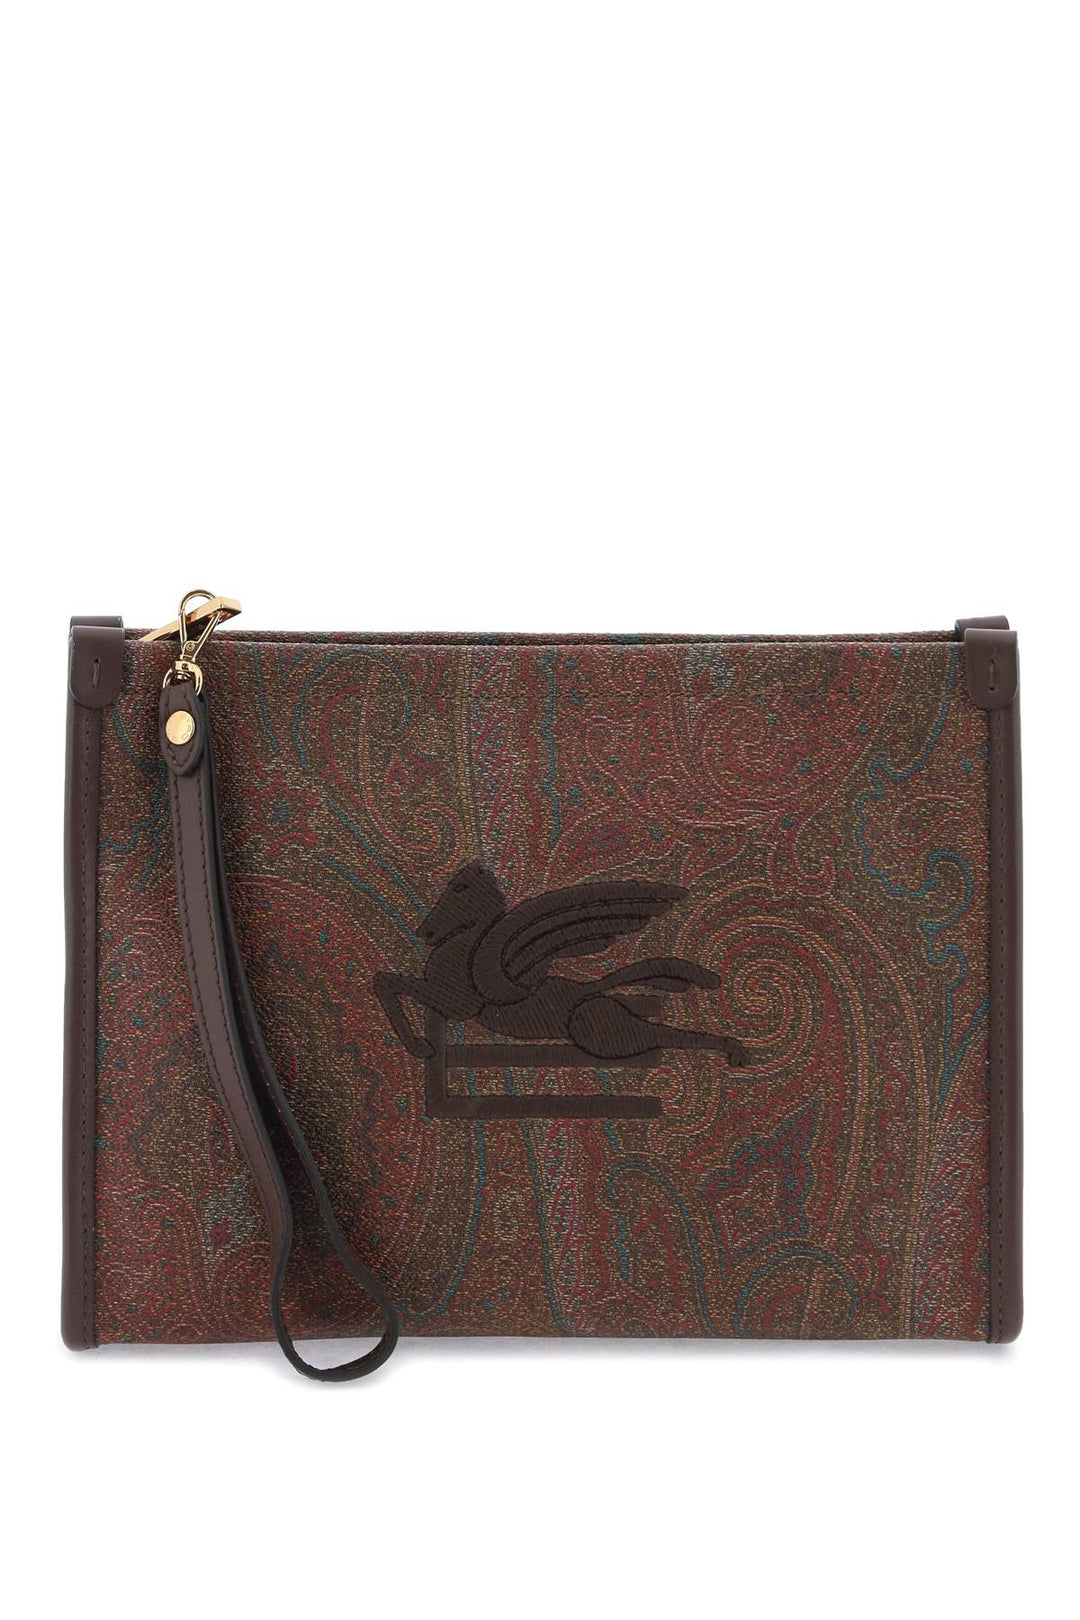 Etro Paisley Pouch With Embroidery   Rosso